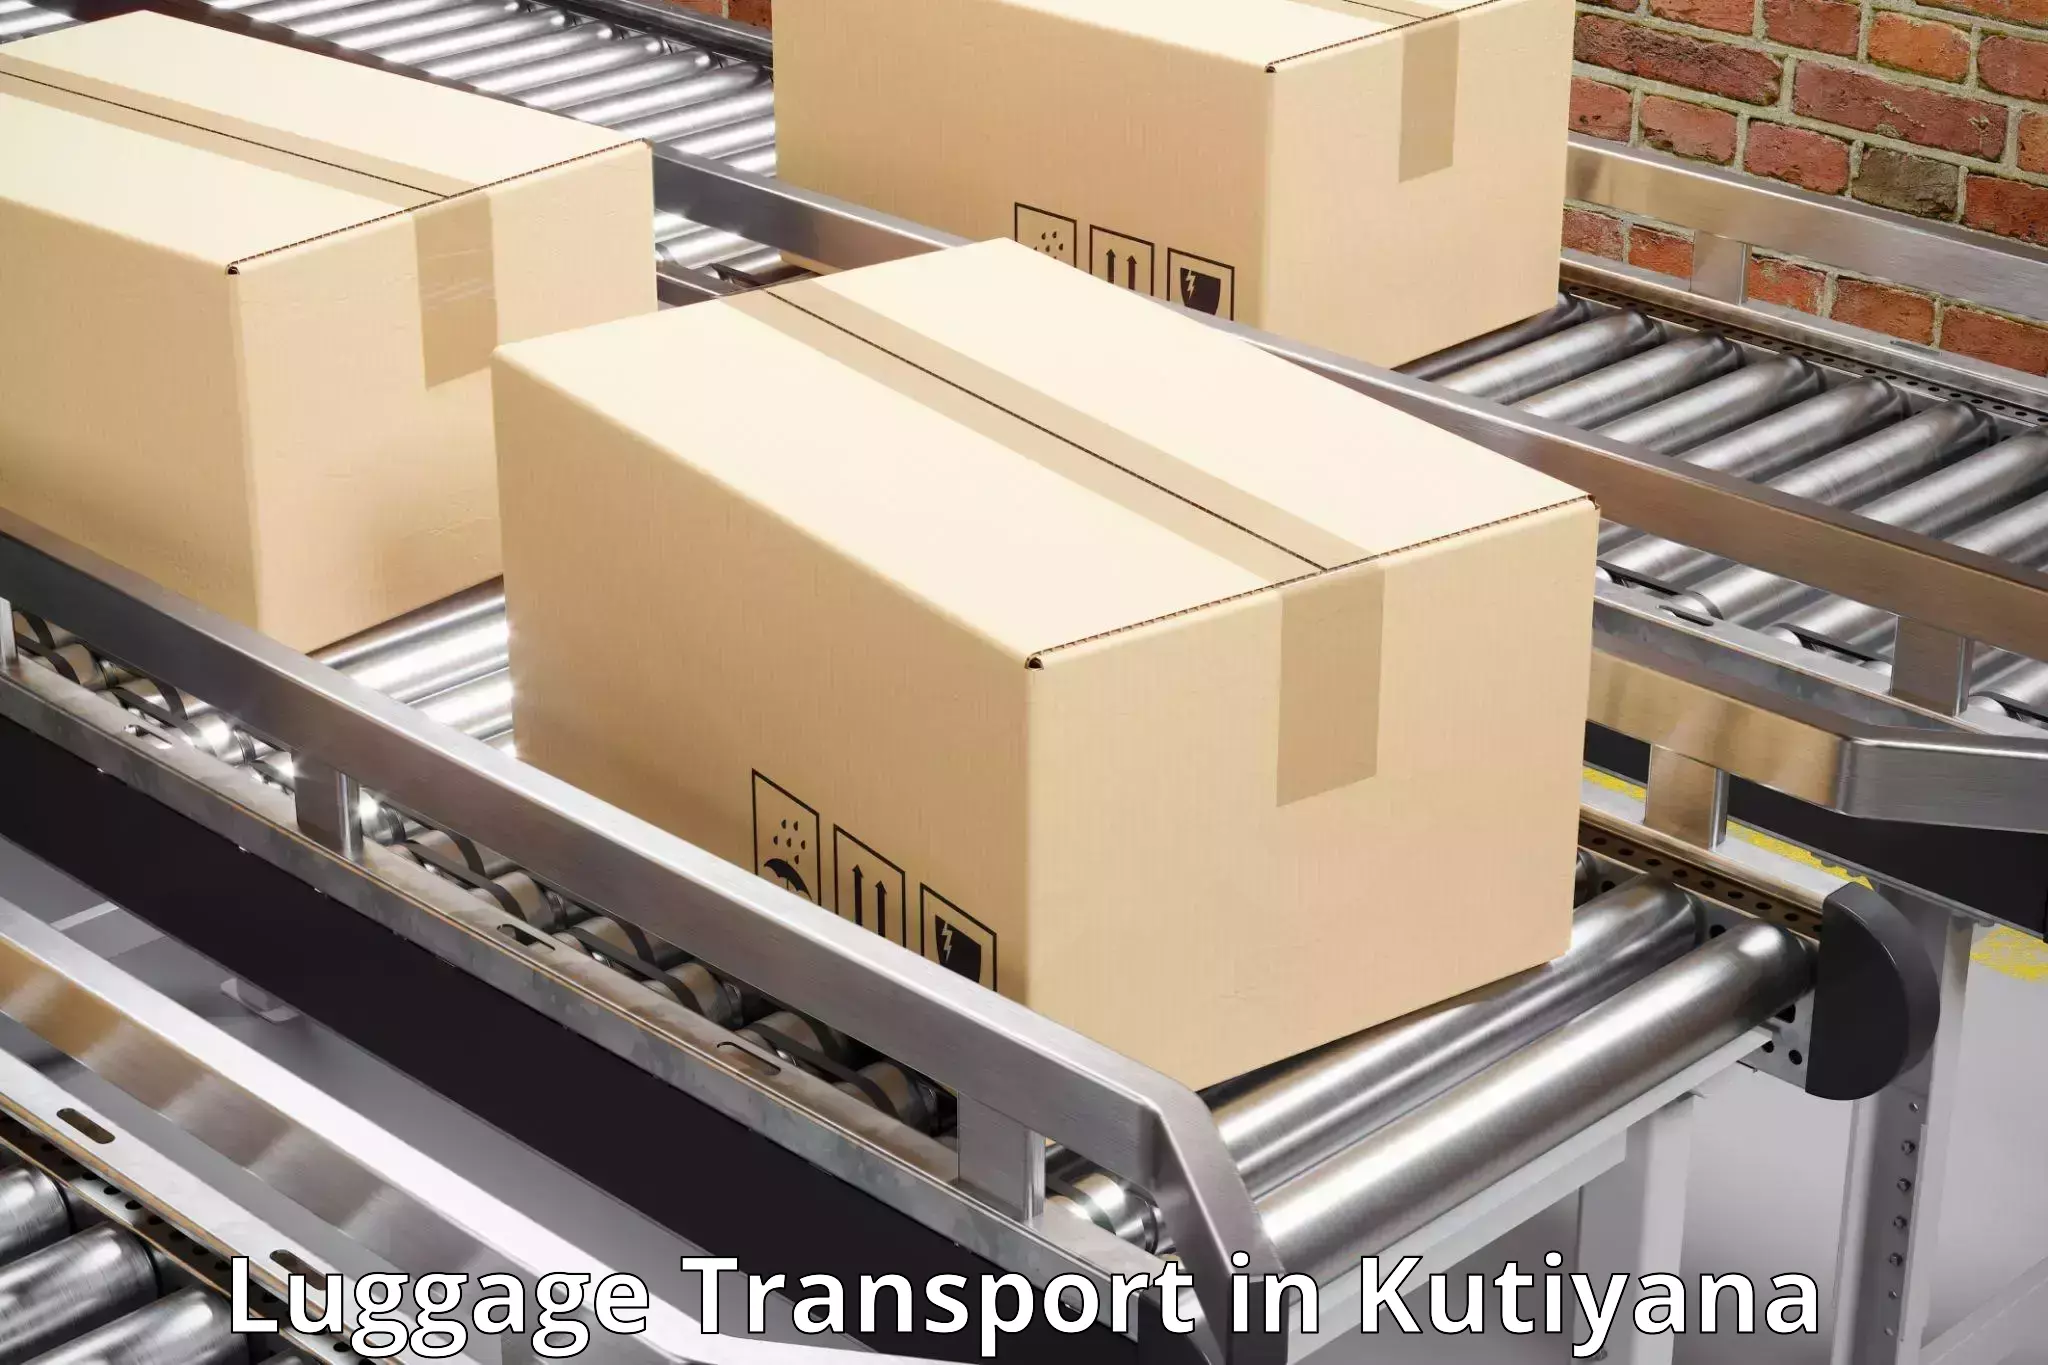 Luggage delivery estimate in Kutiyana